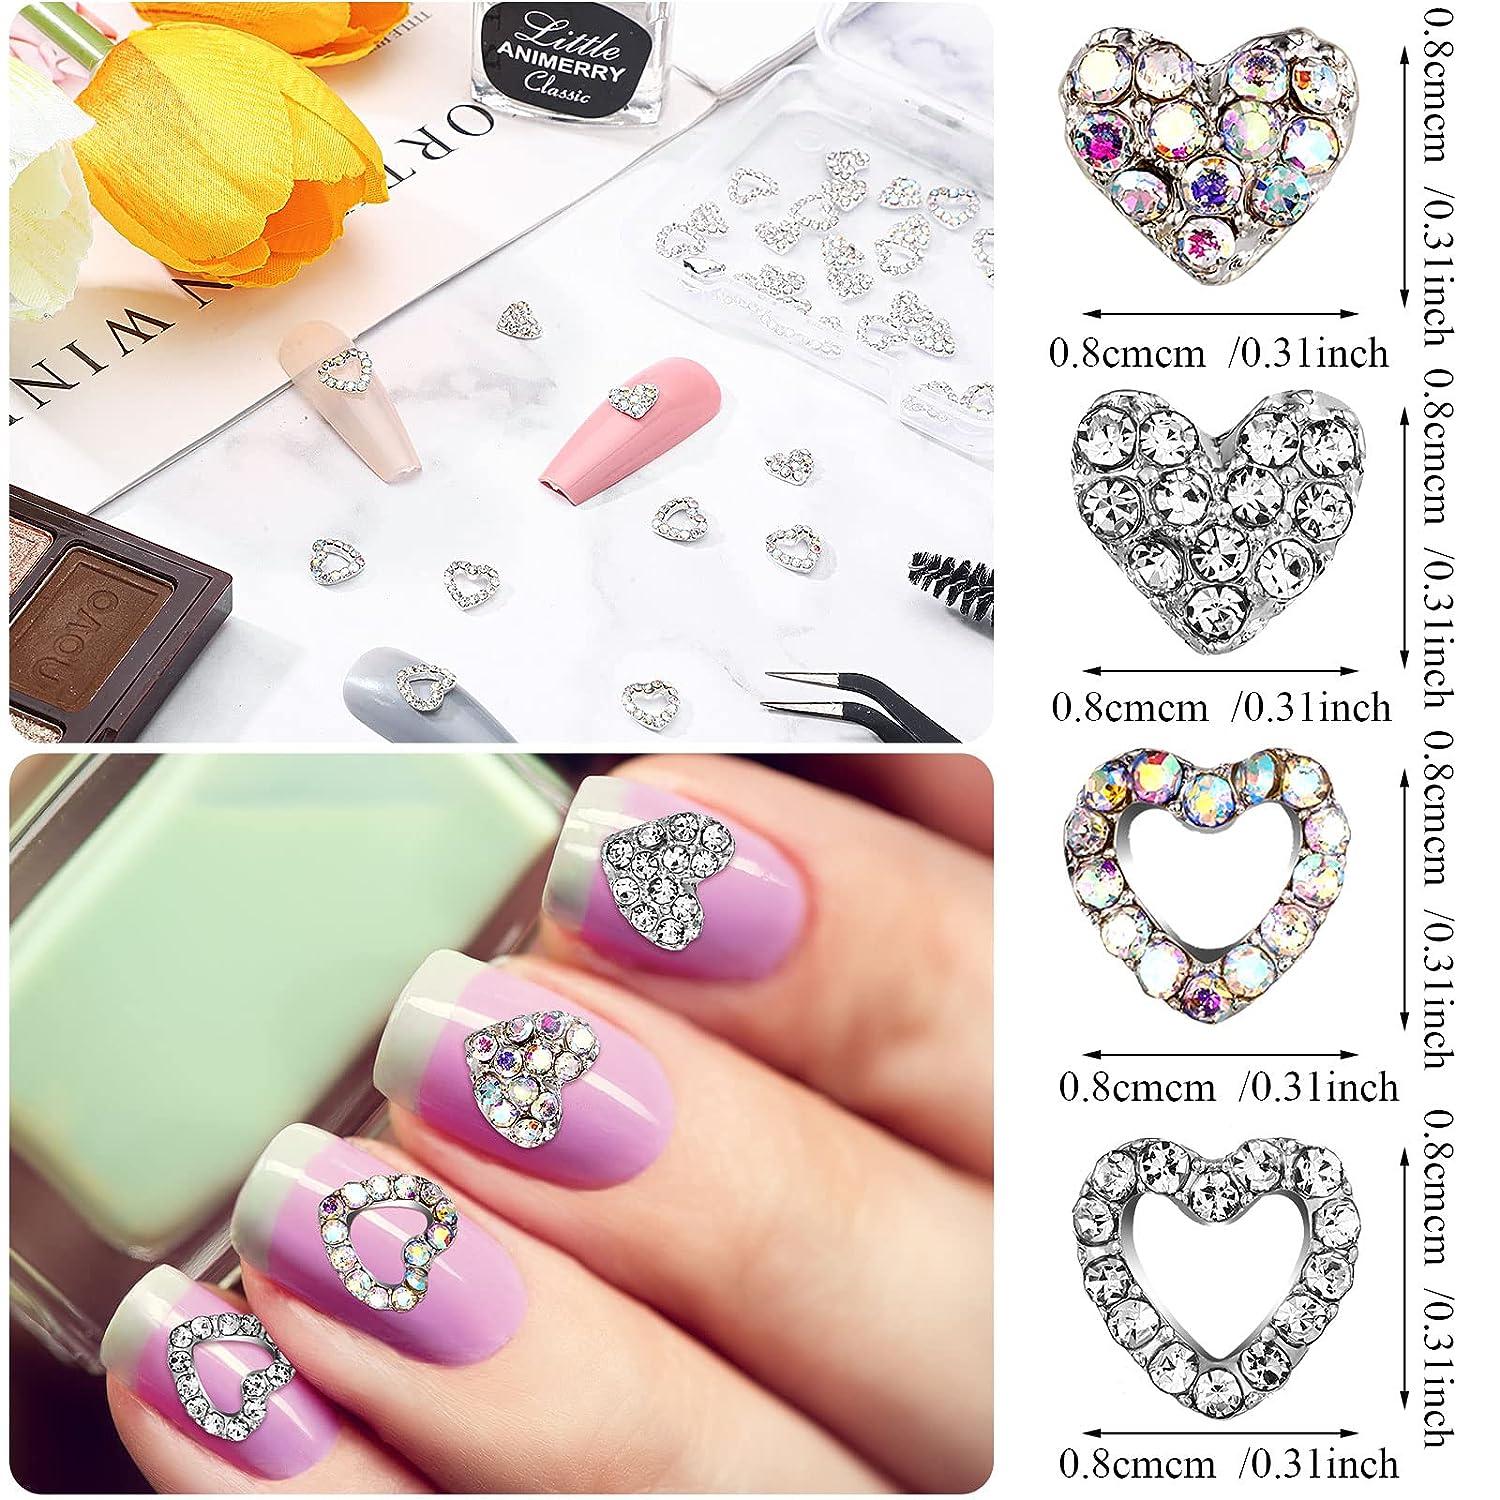 Manicure Decorations Nail Gems Nail diamonds Crystal Charms Alloy